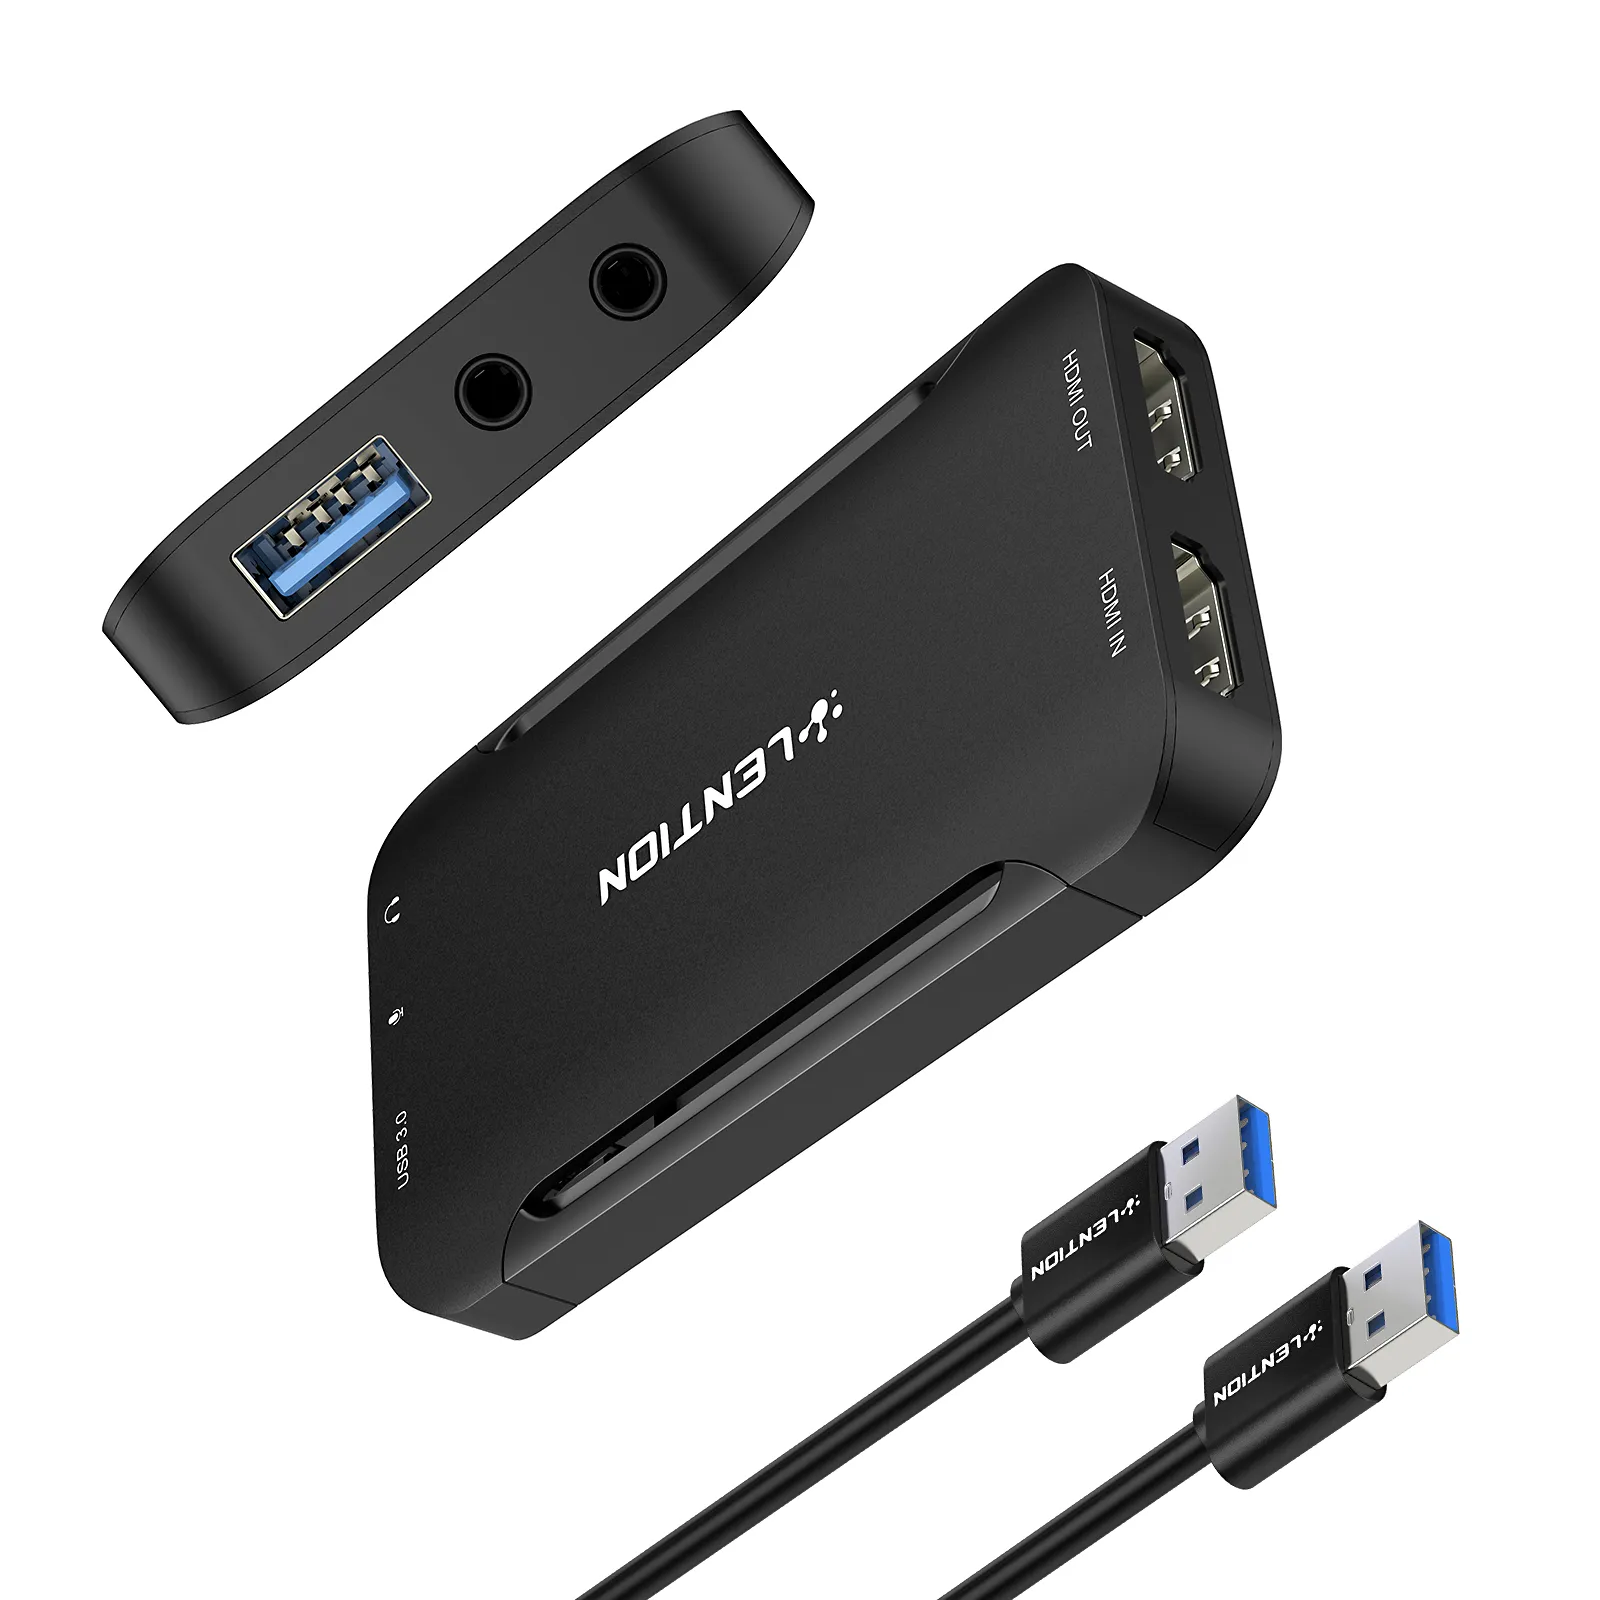 LENTION USB 3.0 HDMI Video Capture Card,1080p60 HD Video Streaming and Game Capturing, HDMI Passthrough, Work with OBS, Xbox, PS4, Switch, Gaming, Recording